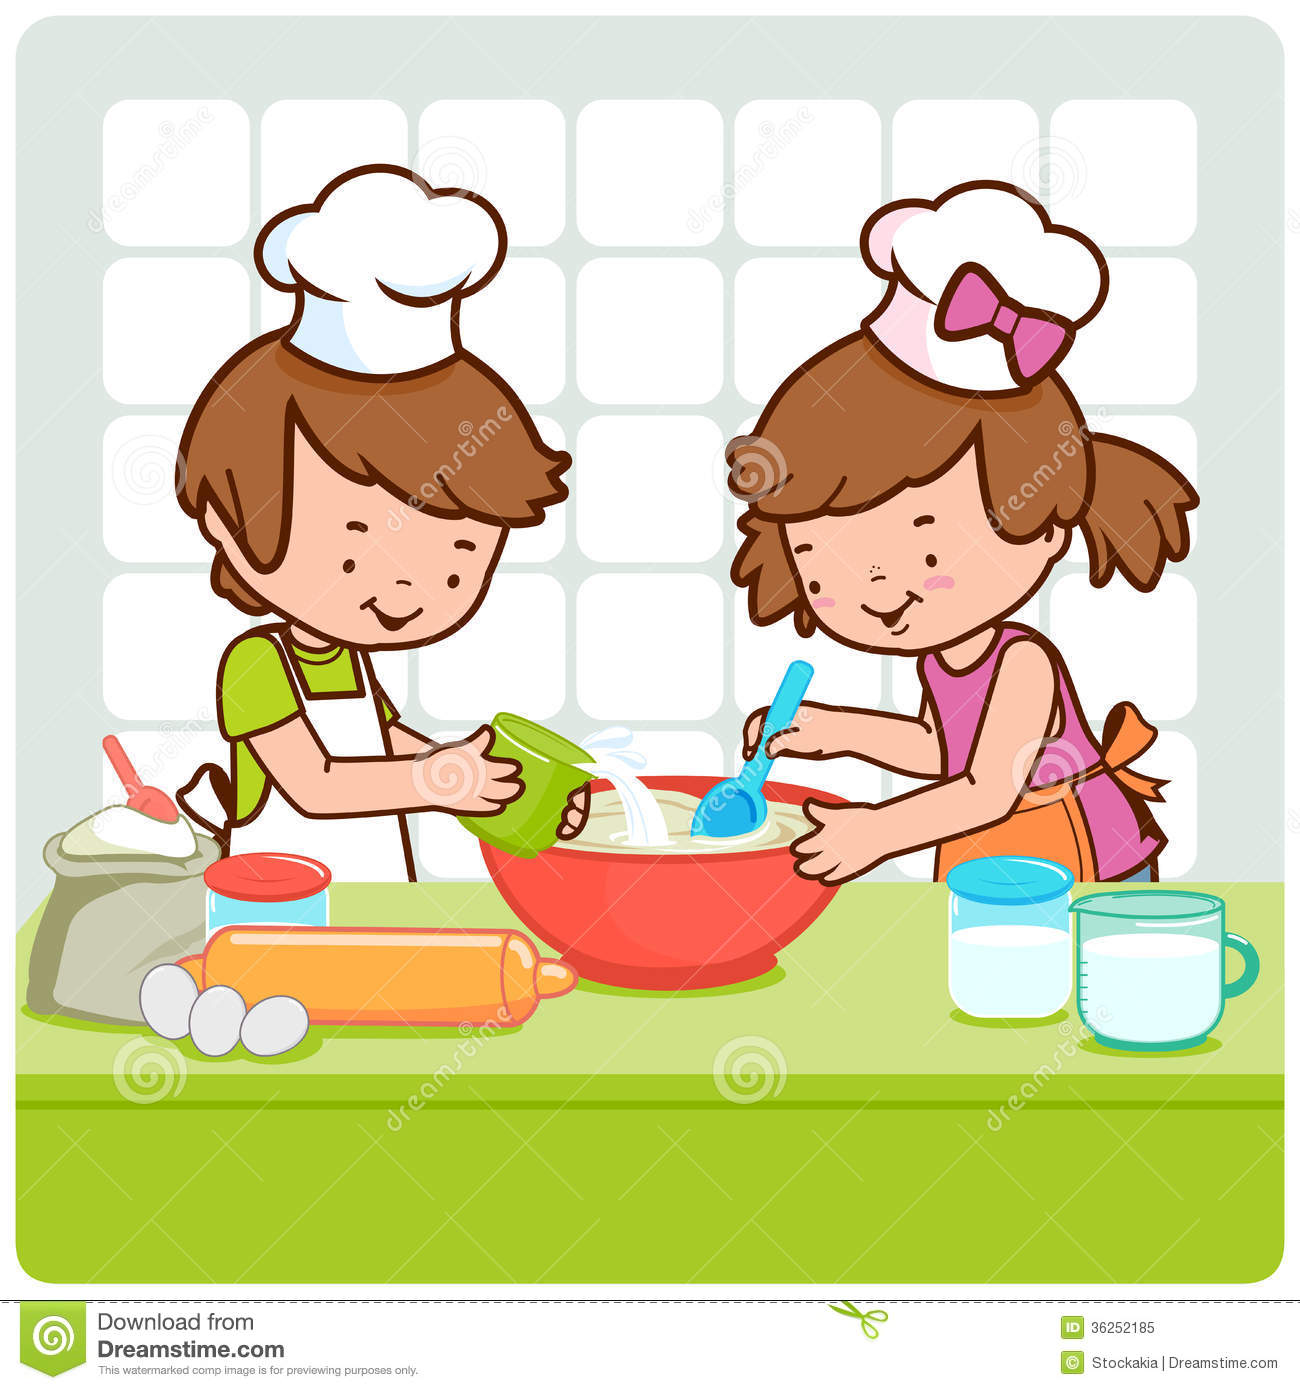 clipart of cooking - photo #41